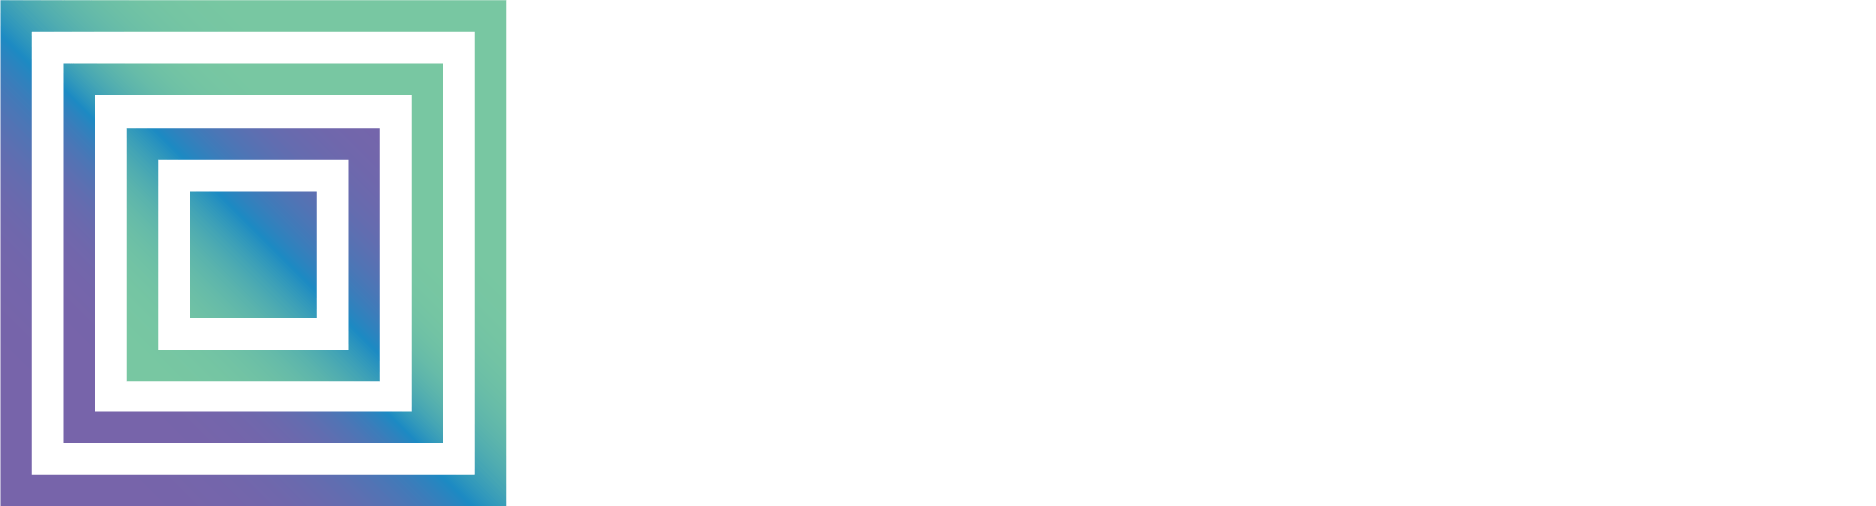 cropped-Foursquare-Developers-logo-1-min.png